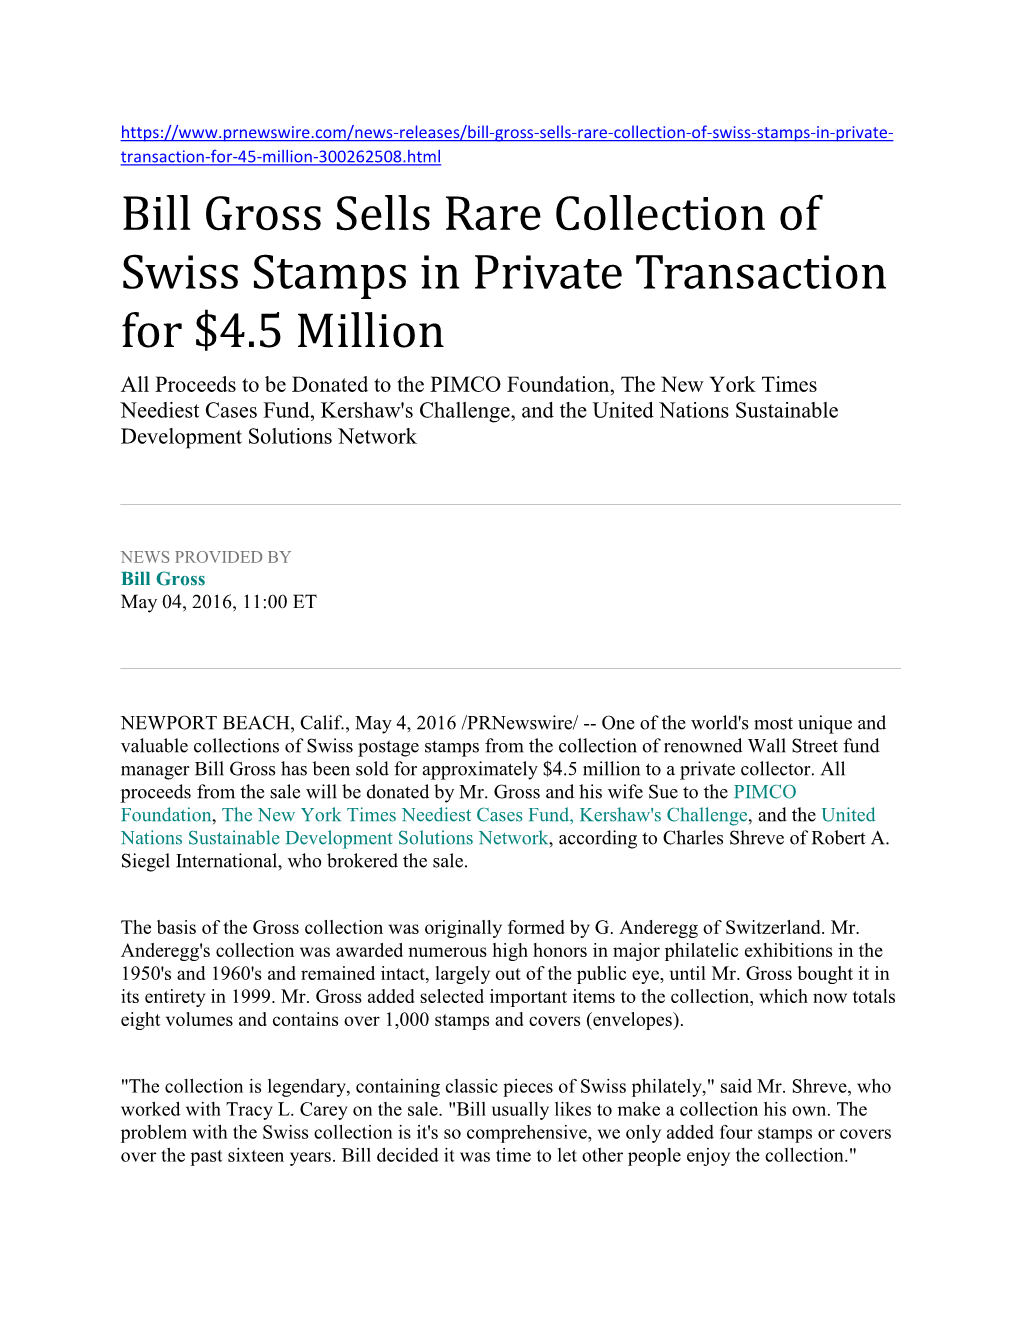 Bill Gross Sells Rare Collection of Swiss Stamps in Private Transaction for $4.5 Million